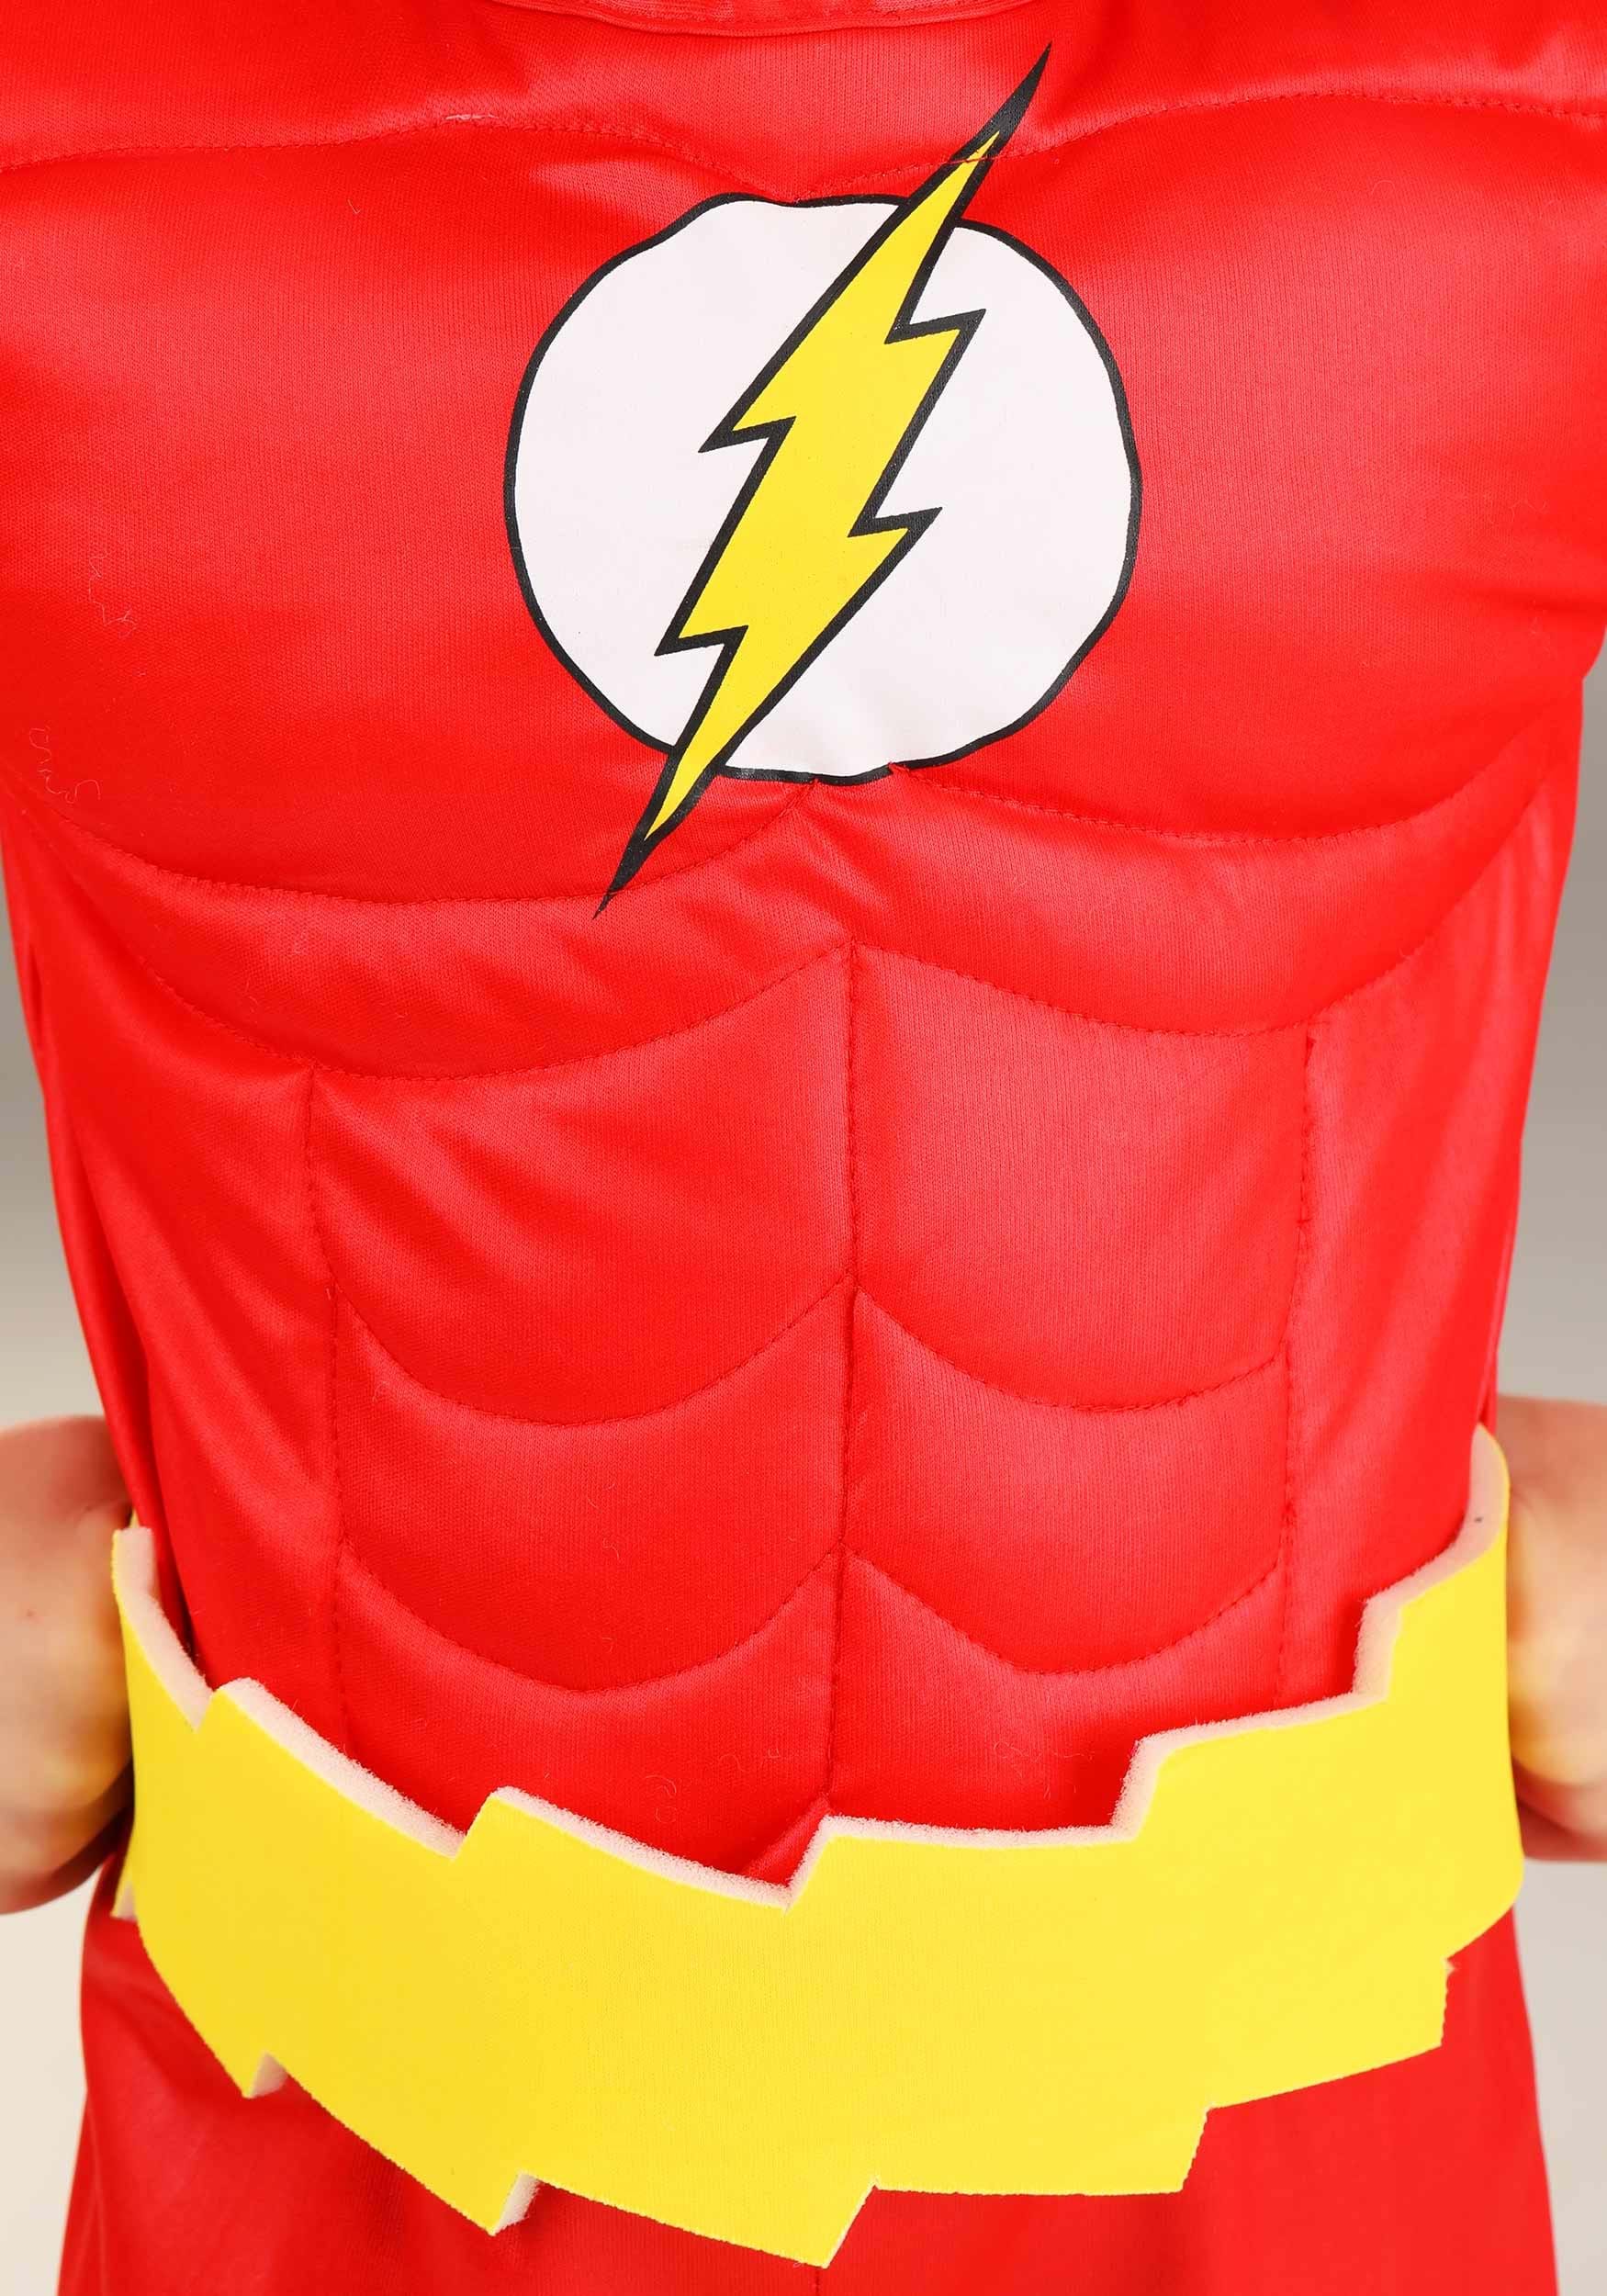 Deluxe Toddler Classic Flash Costume